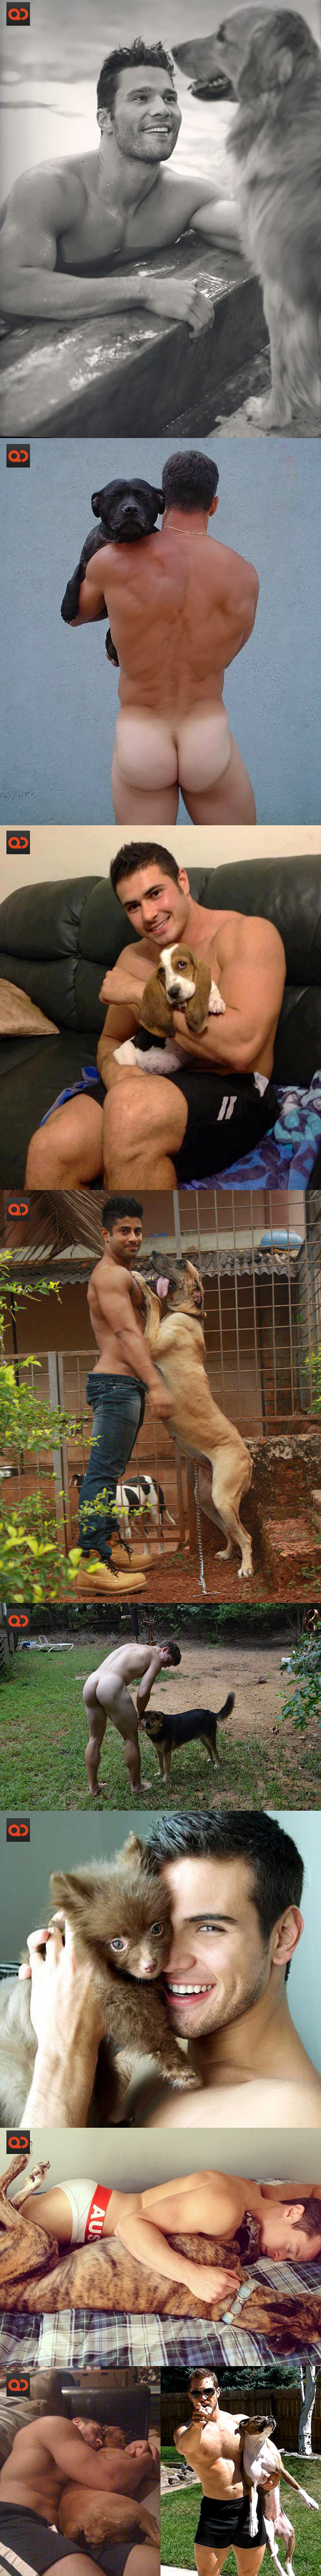 Celebrate National Dog Day With These Sexy Hunks And Their Cute Puppies!